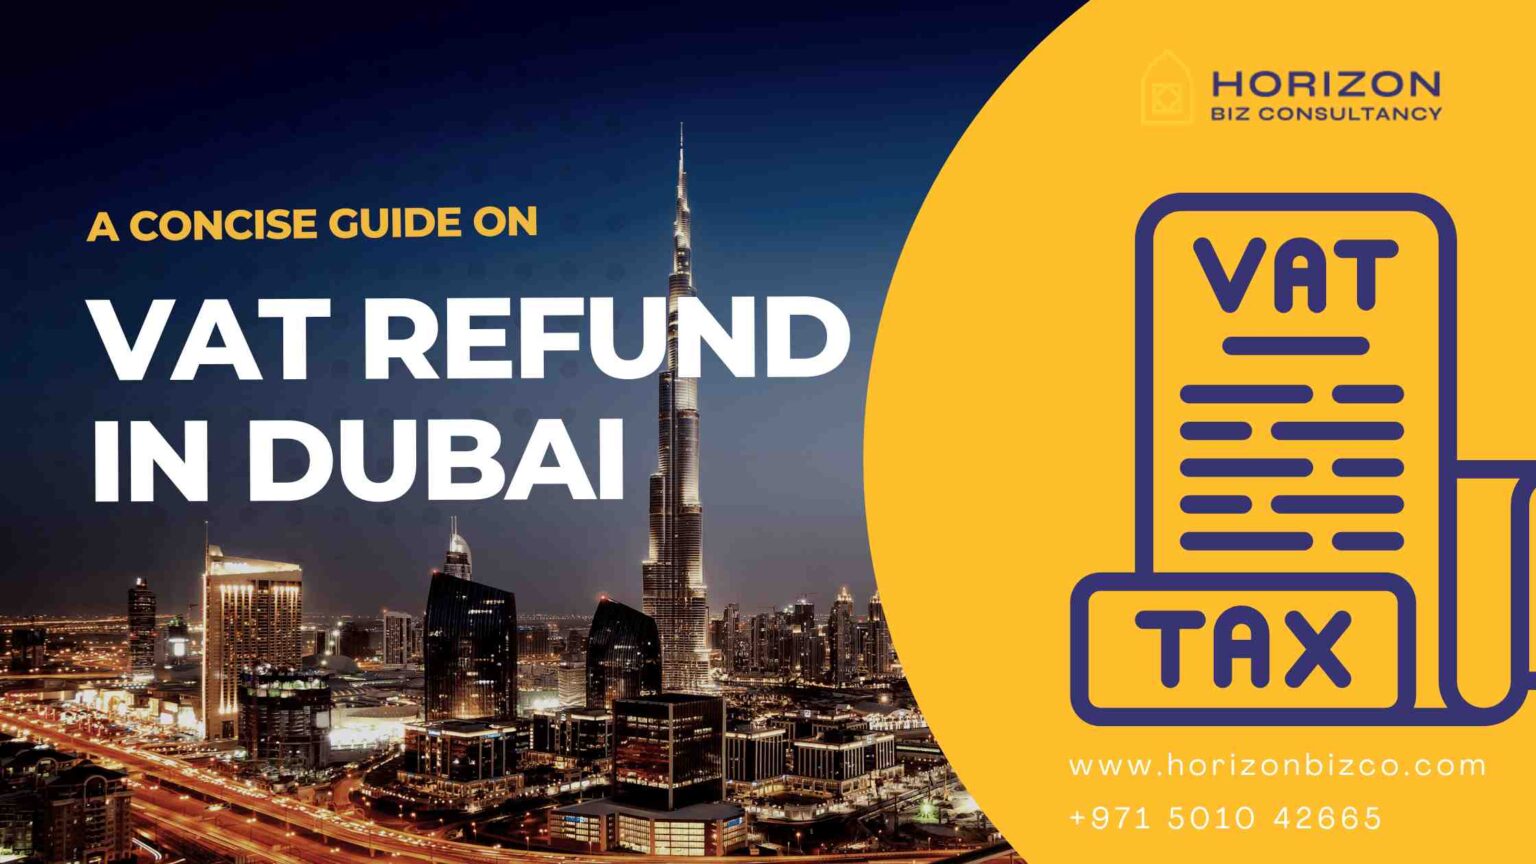 vat-refund-dubai-a-concise-guide-to-refer-to-claim-vat